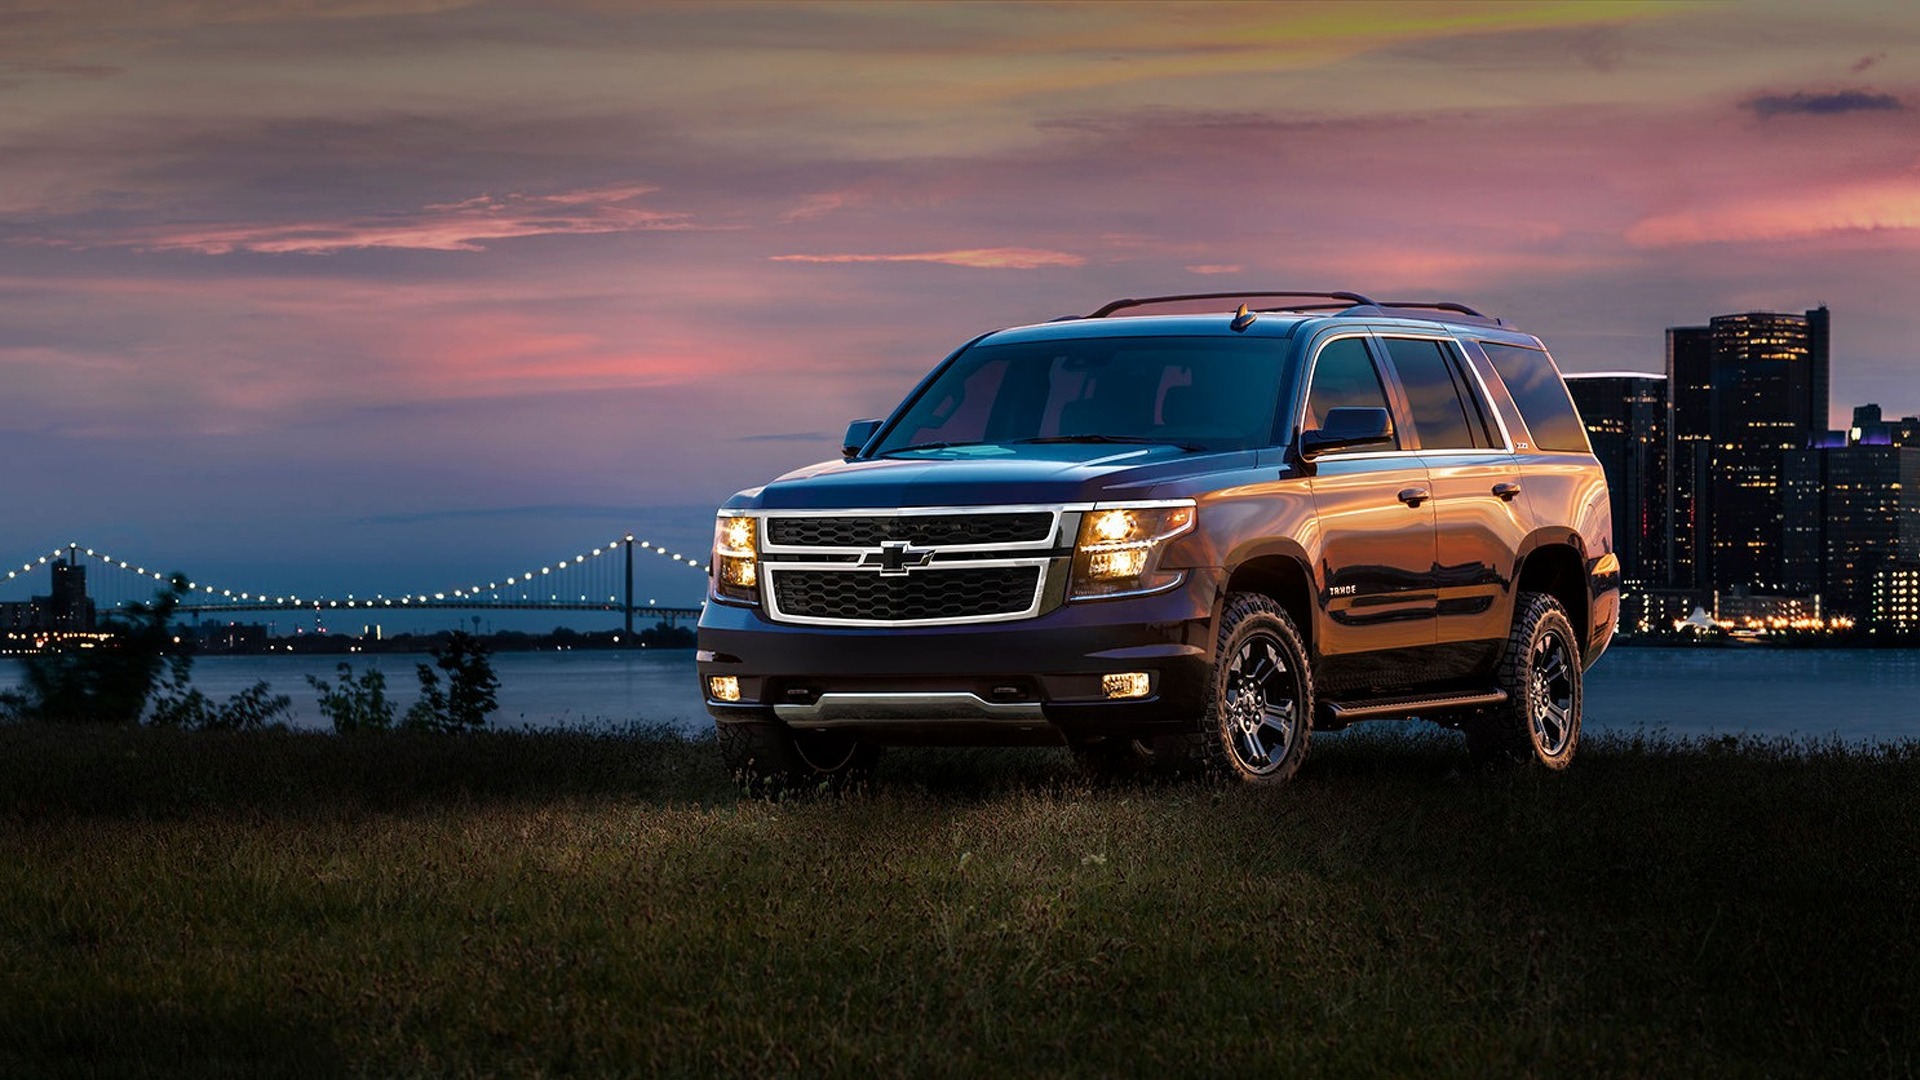 Free download Chevrolet Tahoe Suburban go dark with new Midnight Editions [1920x1080] for your Desktop, Mobile & Tablet. Explore GMC Suburban Wallpaper. GMC Suburban Wallpaper, GMC Background, GMC Wallpaper